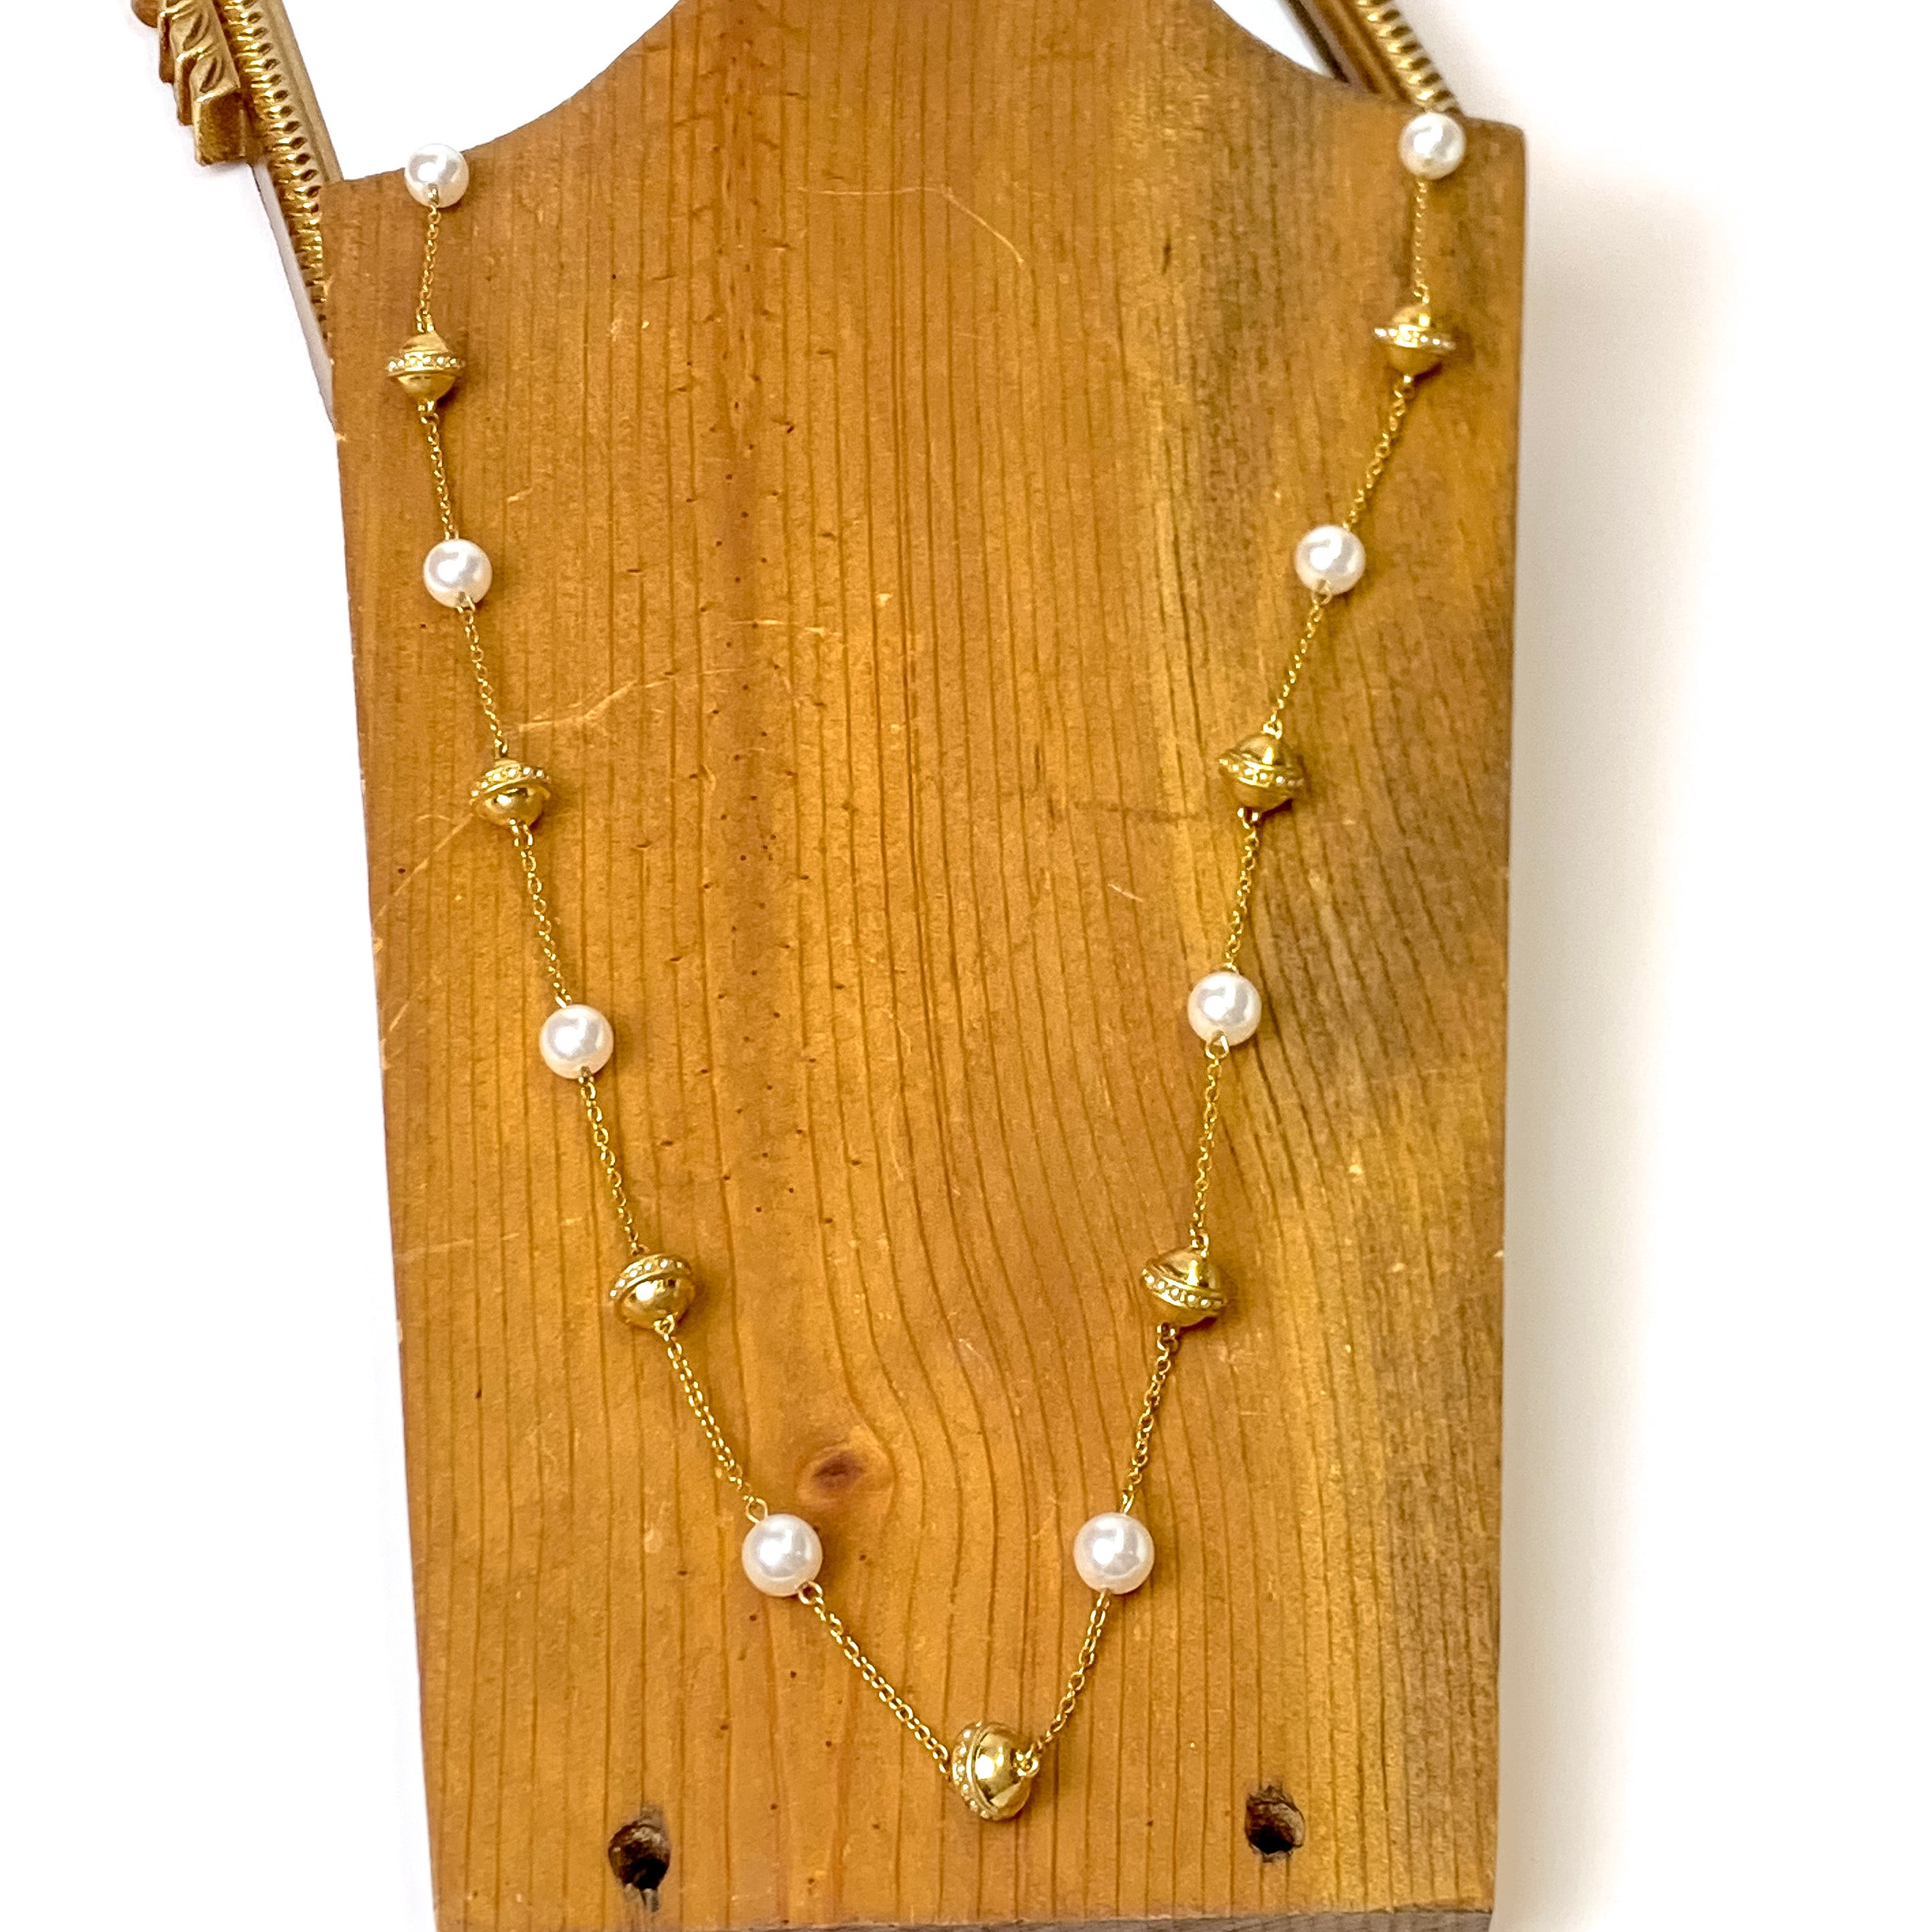 Long Gold Tone Necklace with Gold and Pearl Bead Accents - Giddy Up Glamour Boutique